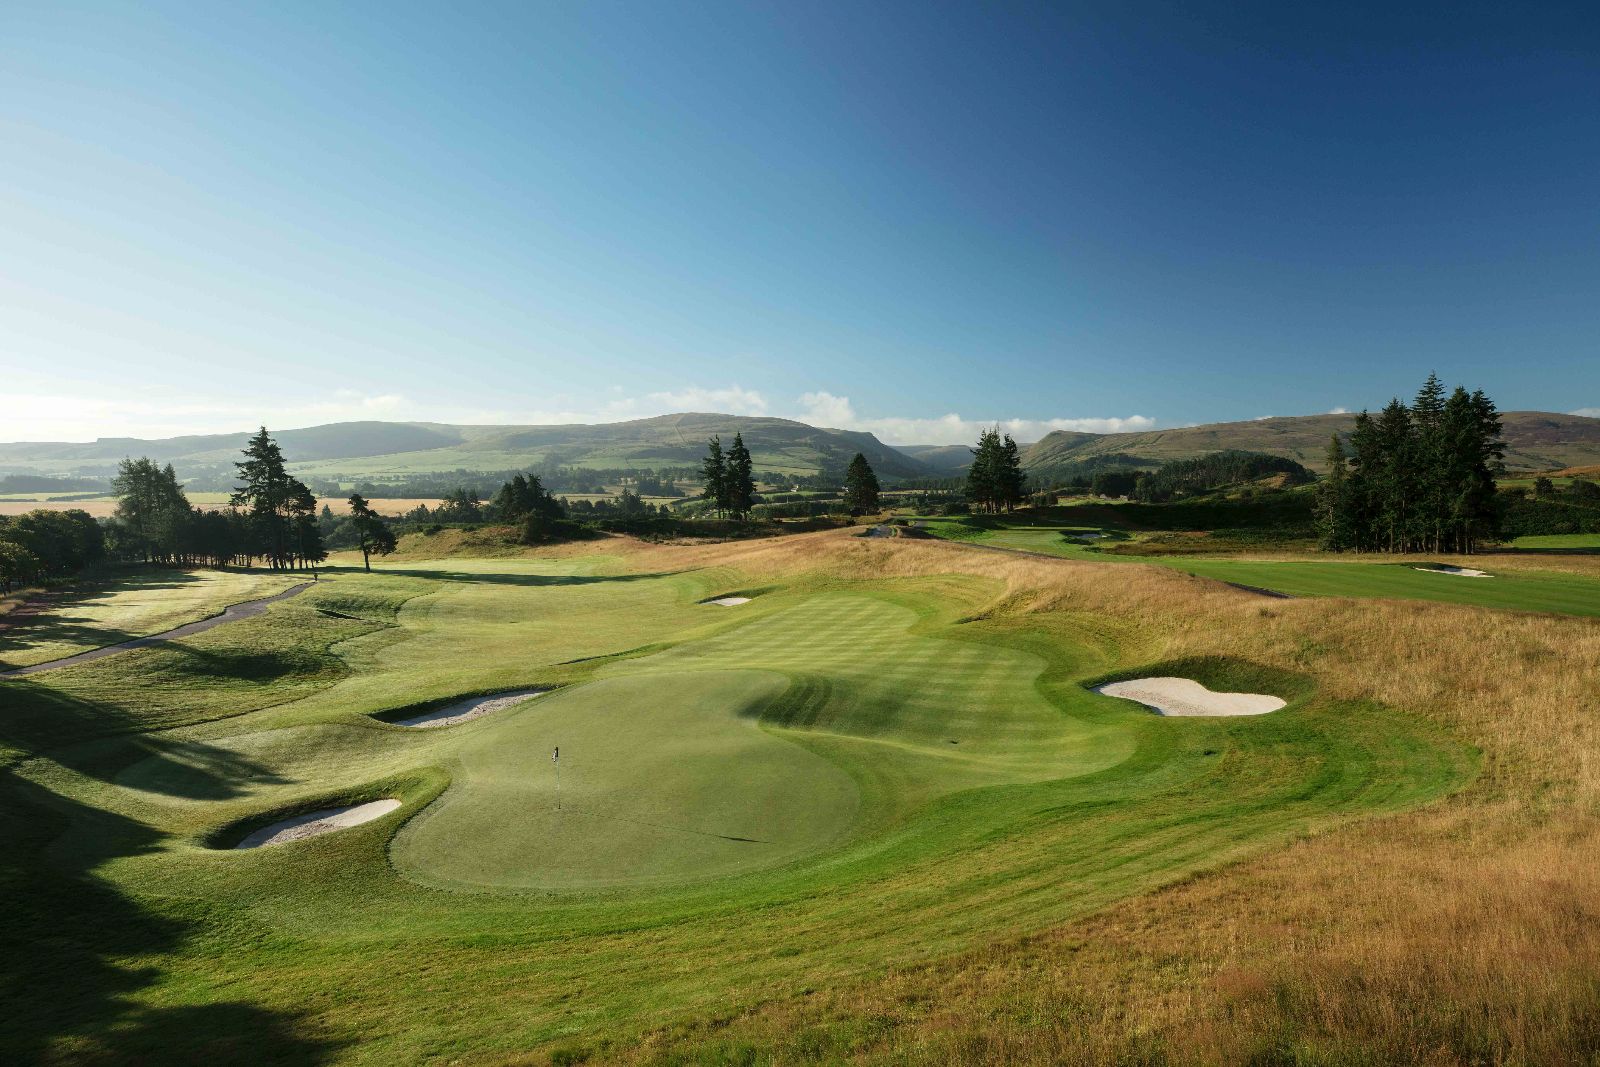 Eighteenth hole of one of the championship golf courses at Gleneagles in Scotland